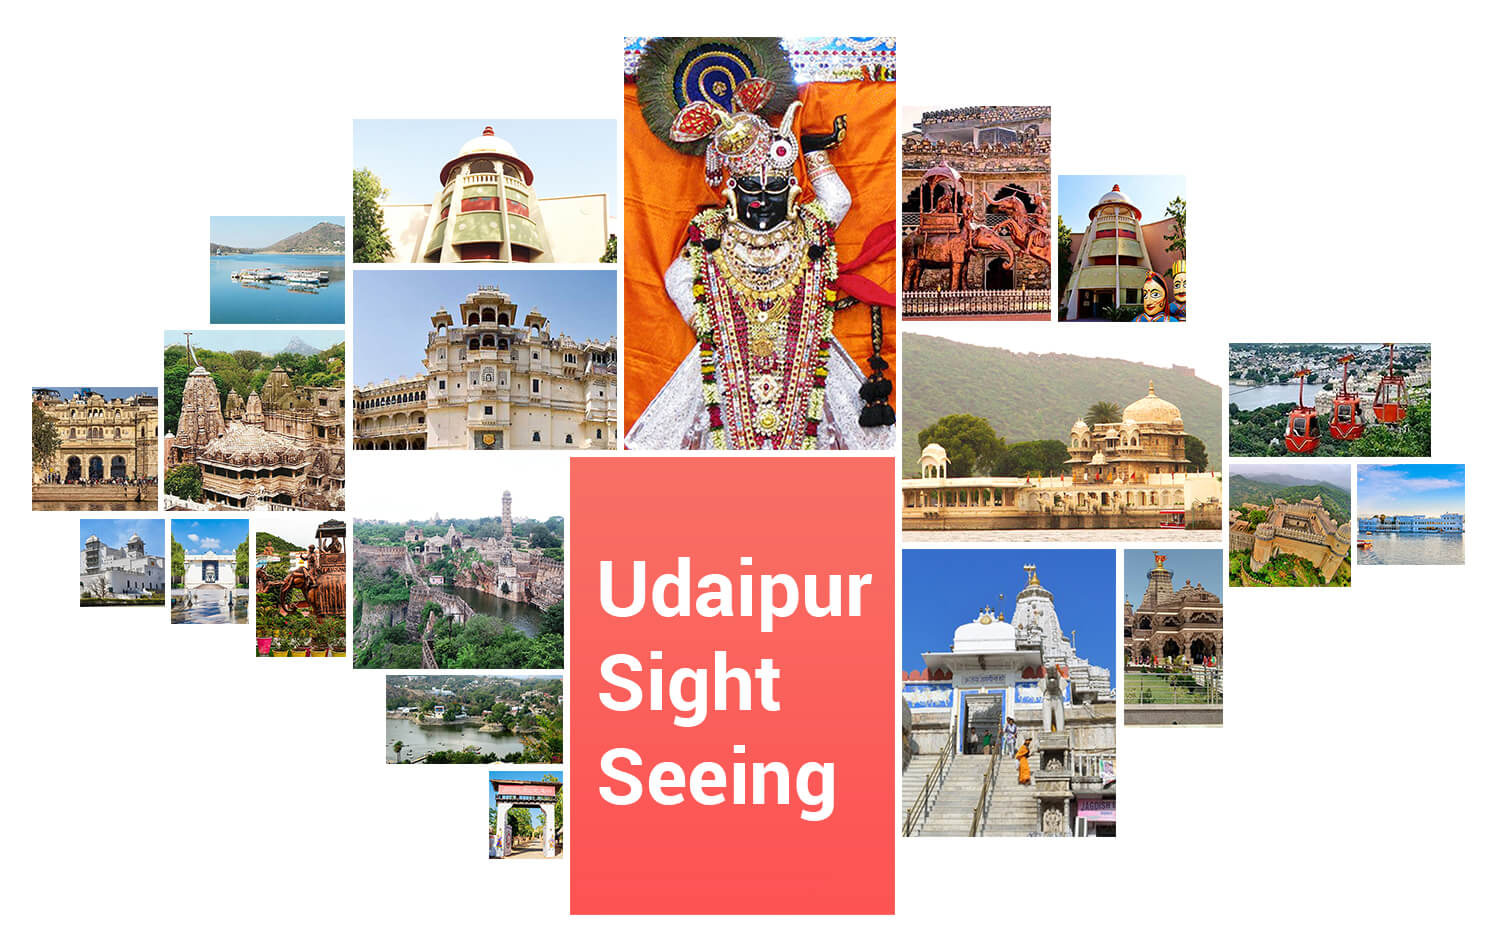 Taxi for Udaipur Sightseeing | Udaipur Sightseeing Taxi